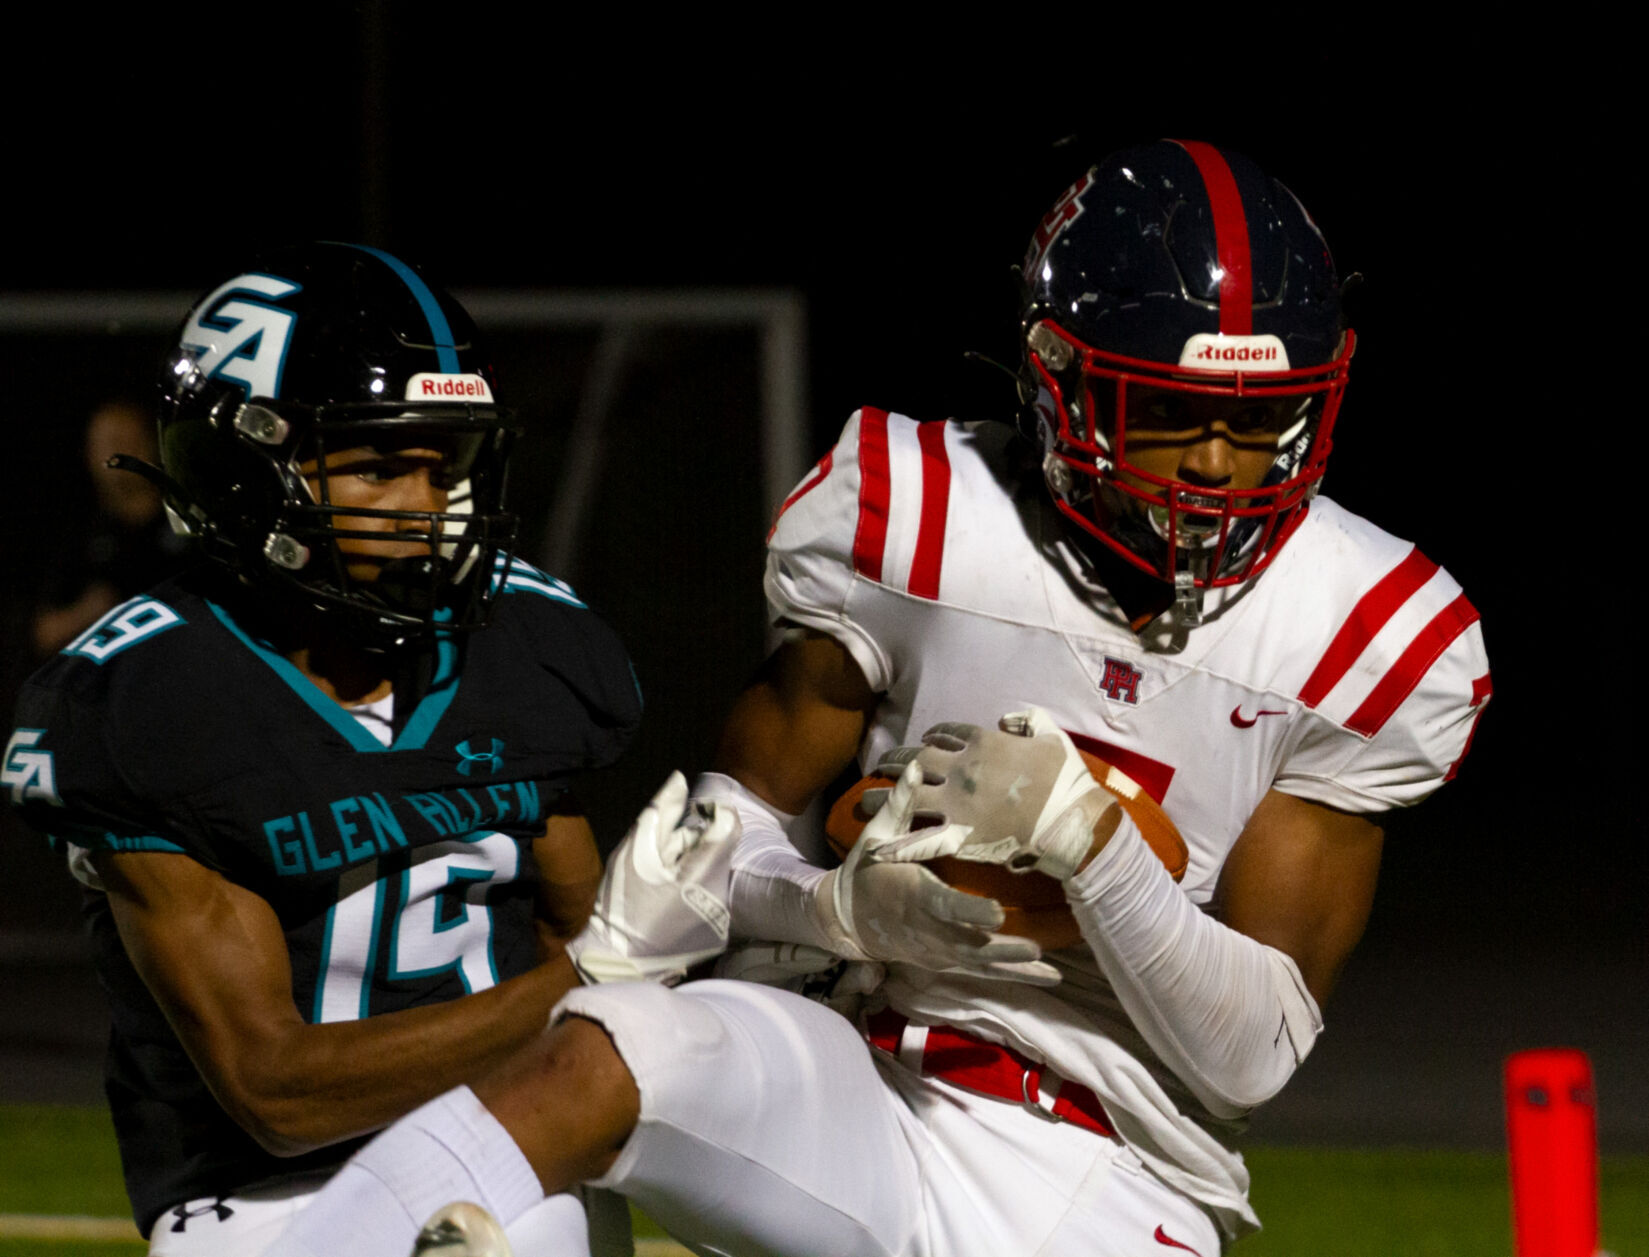 Glen Allen extends undefeated run with a 14-6 win over Patrick Henry